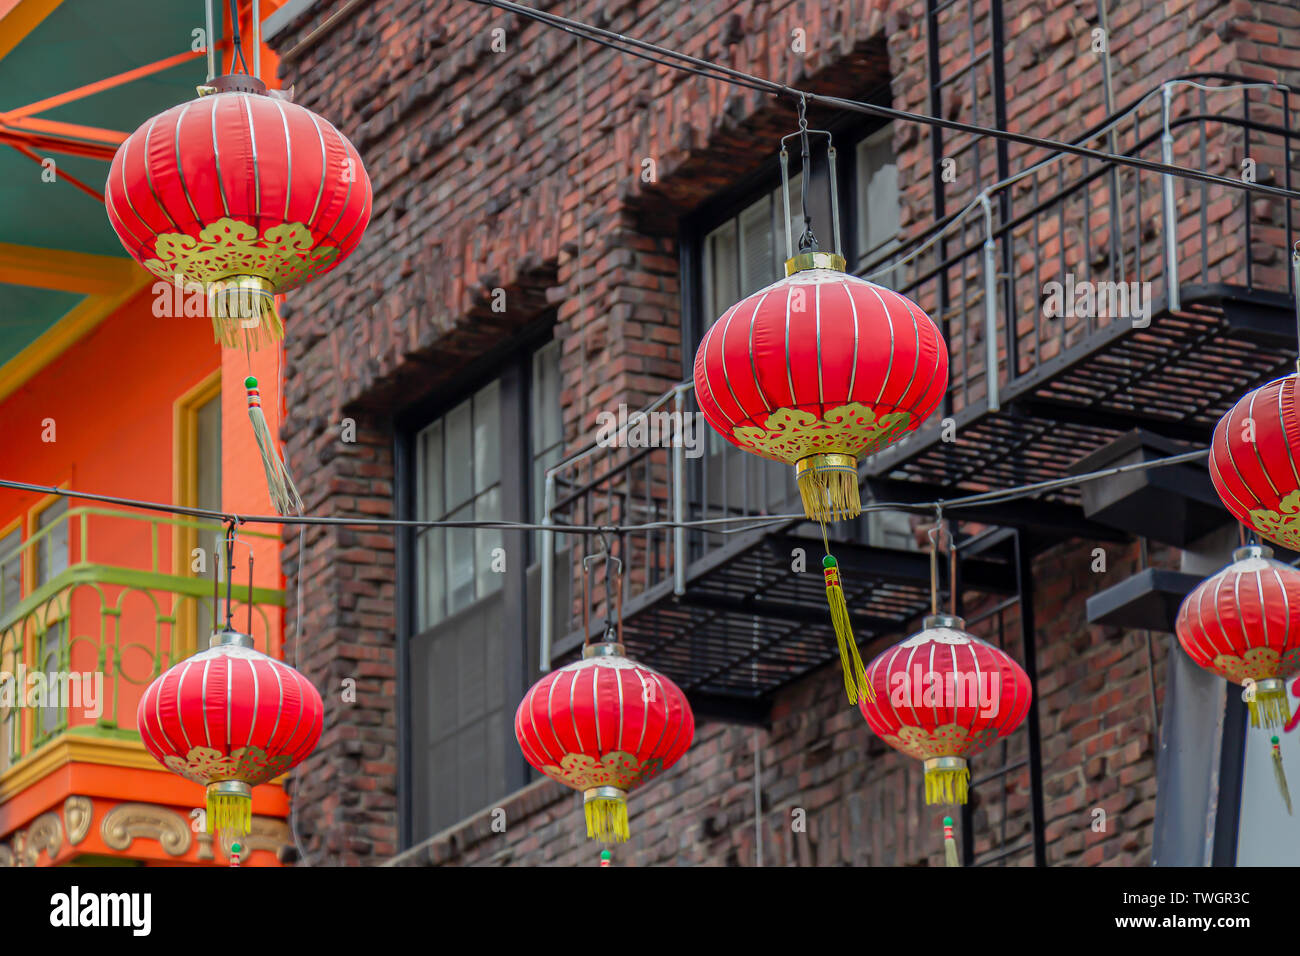 Red-and-gold Chinese lanterns in front of an old brick building in San Francisco, California, USA. Stock Photo